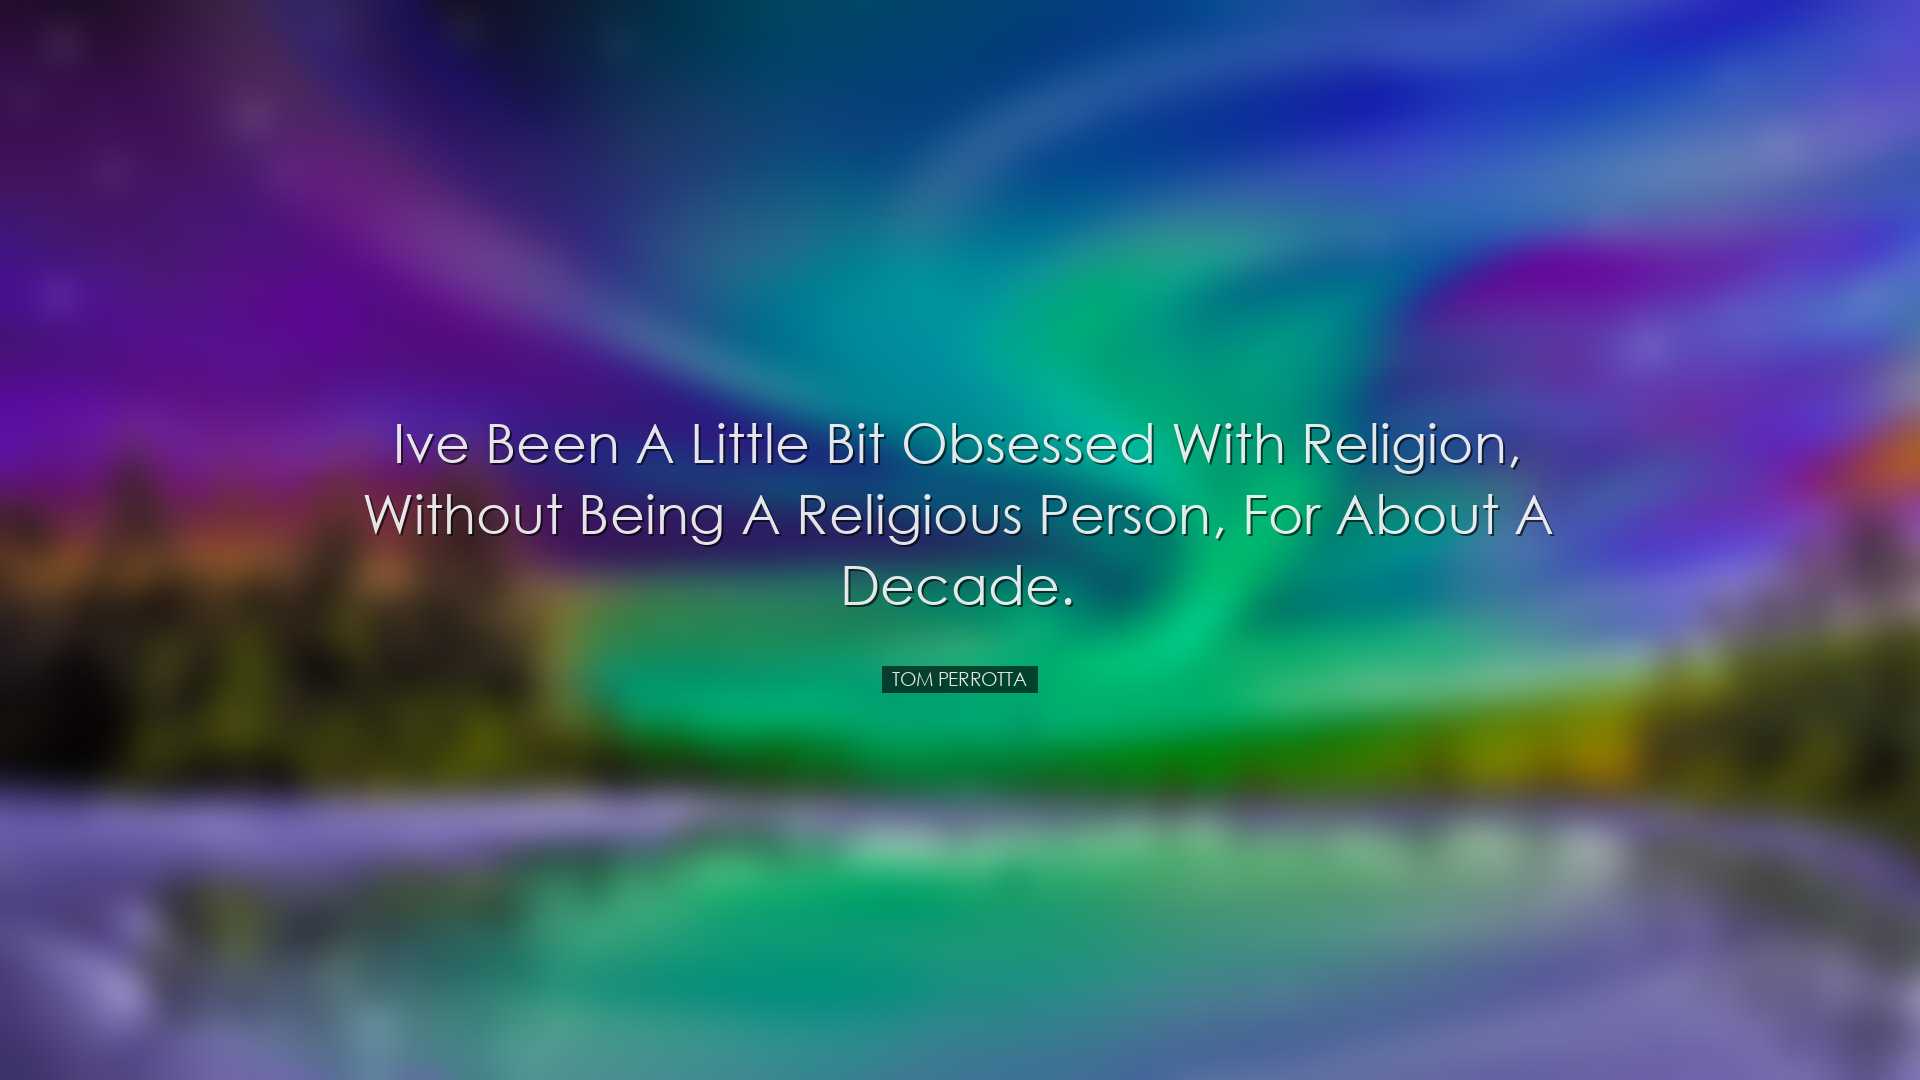 Ive been a little bit obsessed with religion, without being a reli